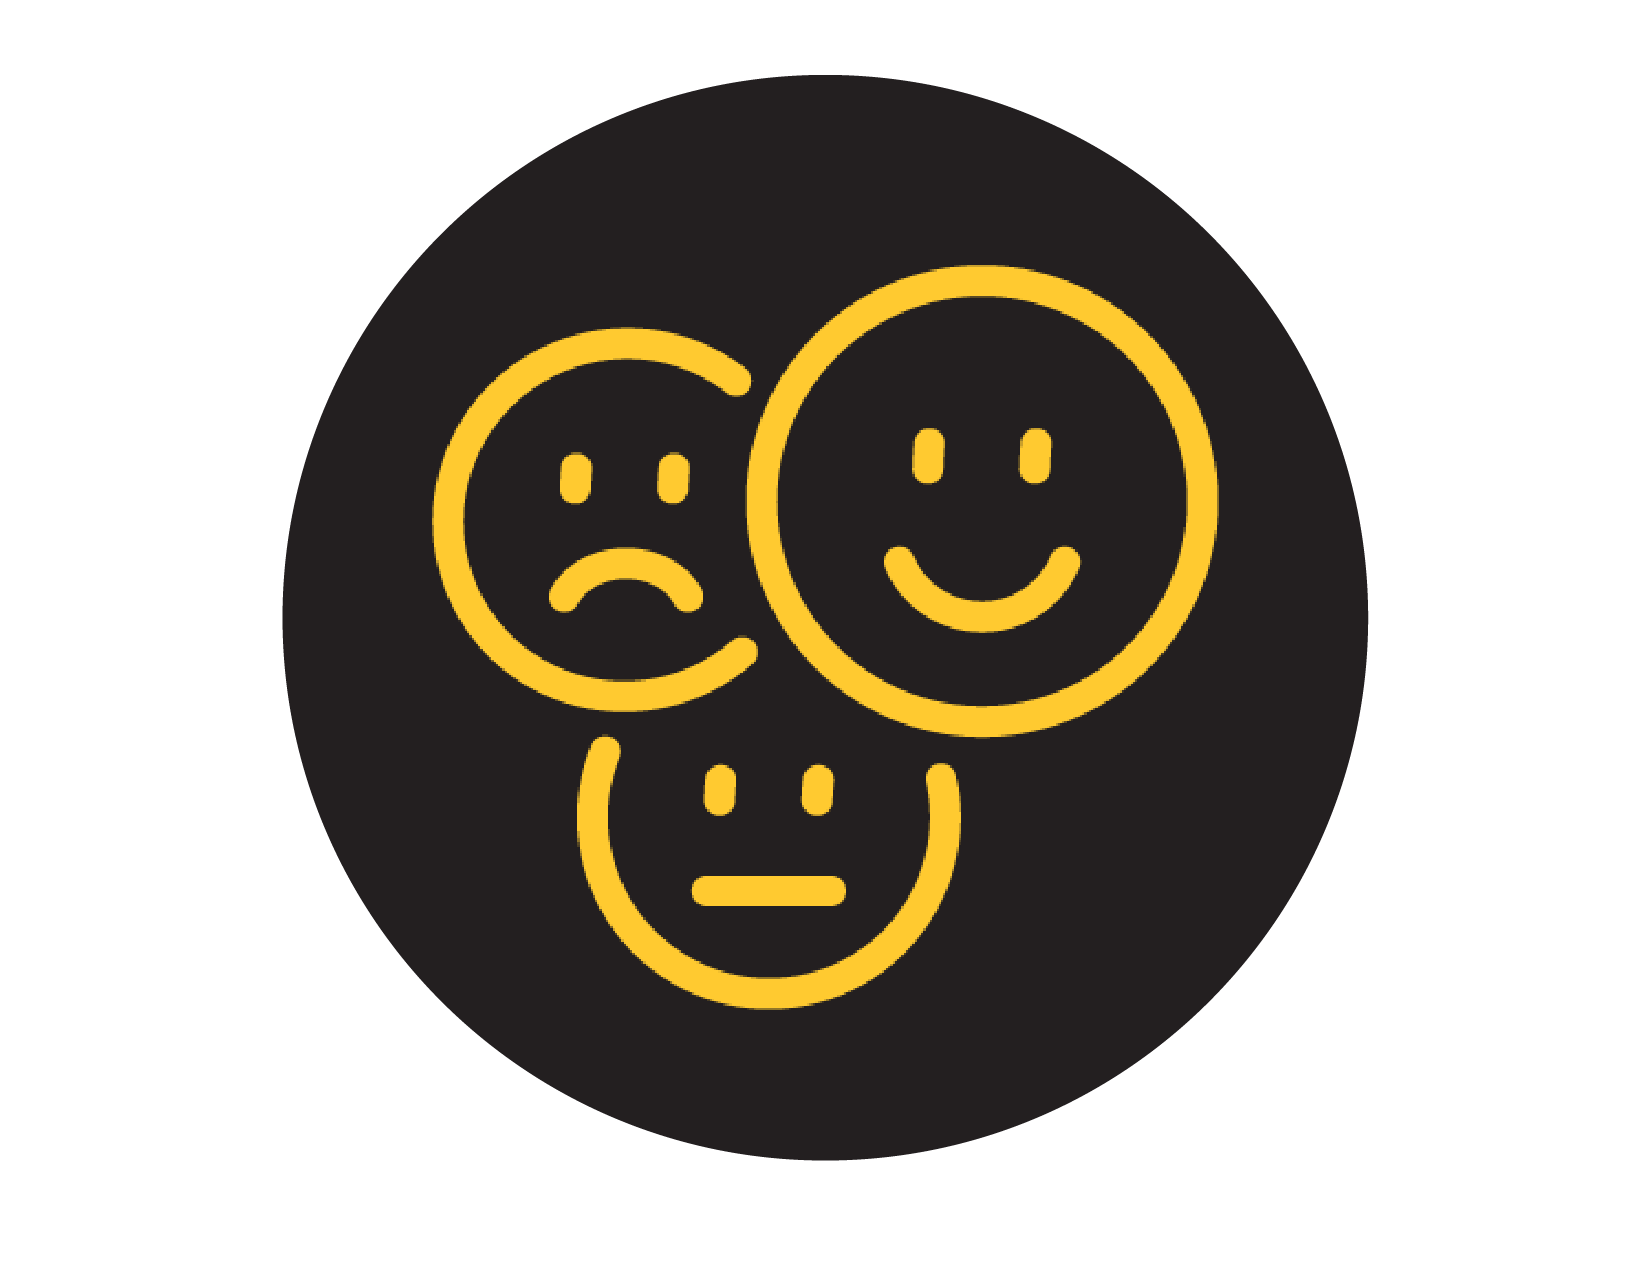 Smiley faces and other expressions icon